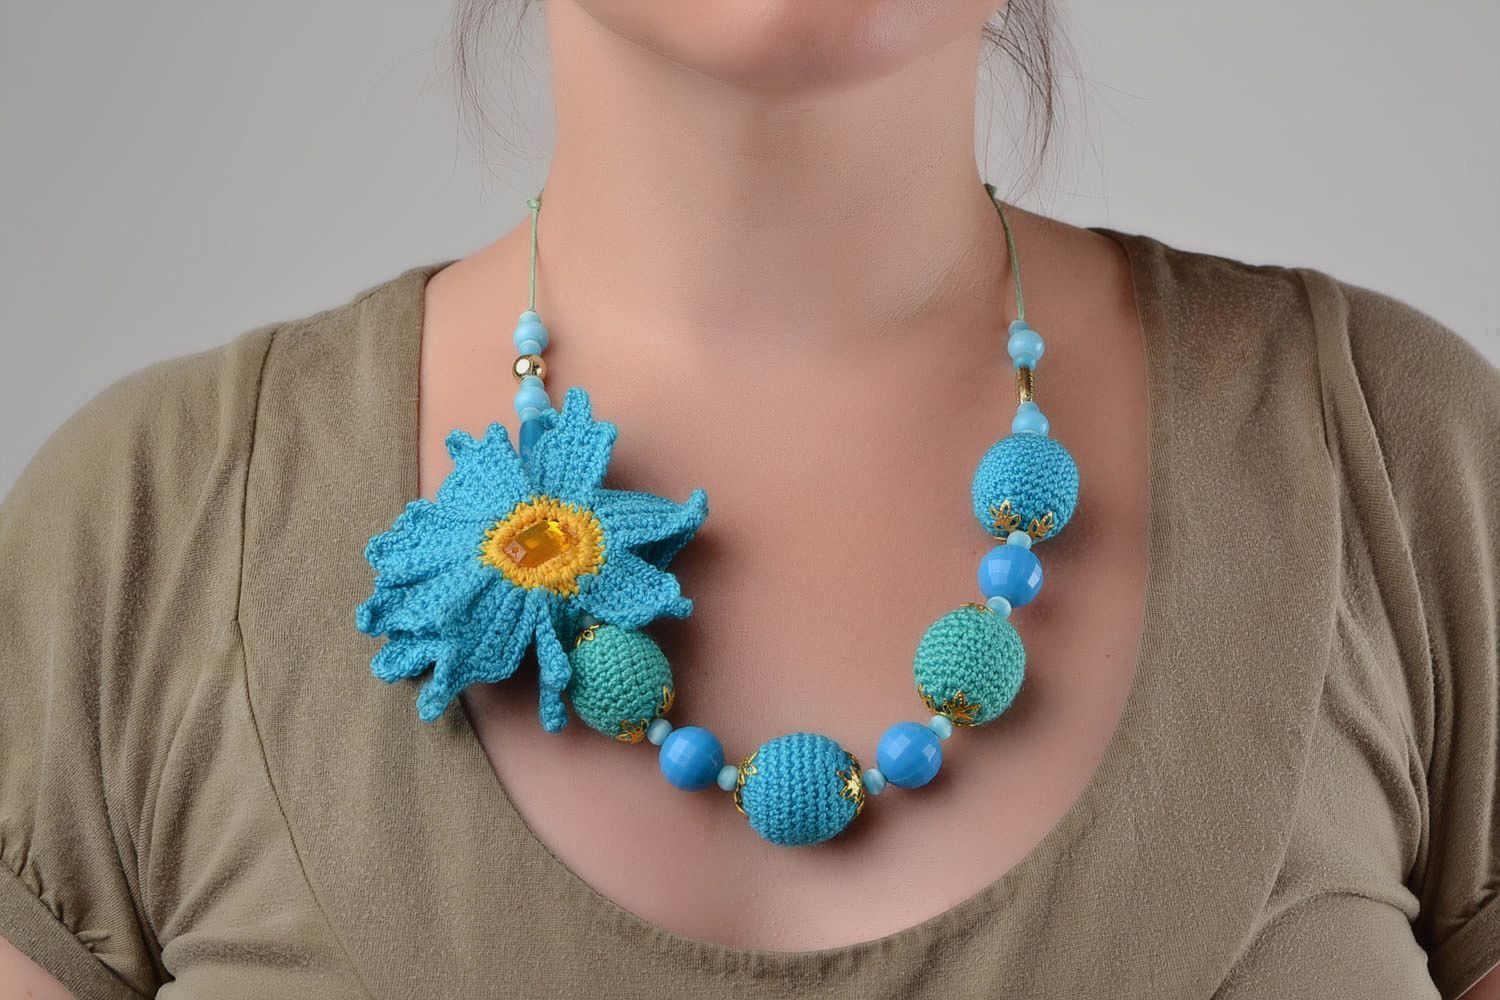 Handmade blue crochet ball necklace with beads and flower babywearing necklace photo 1